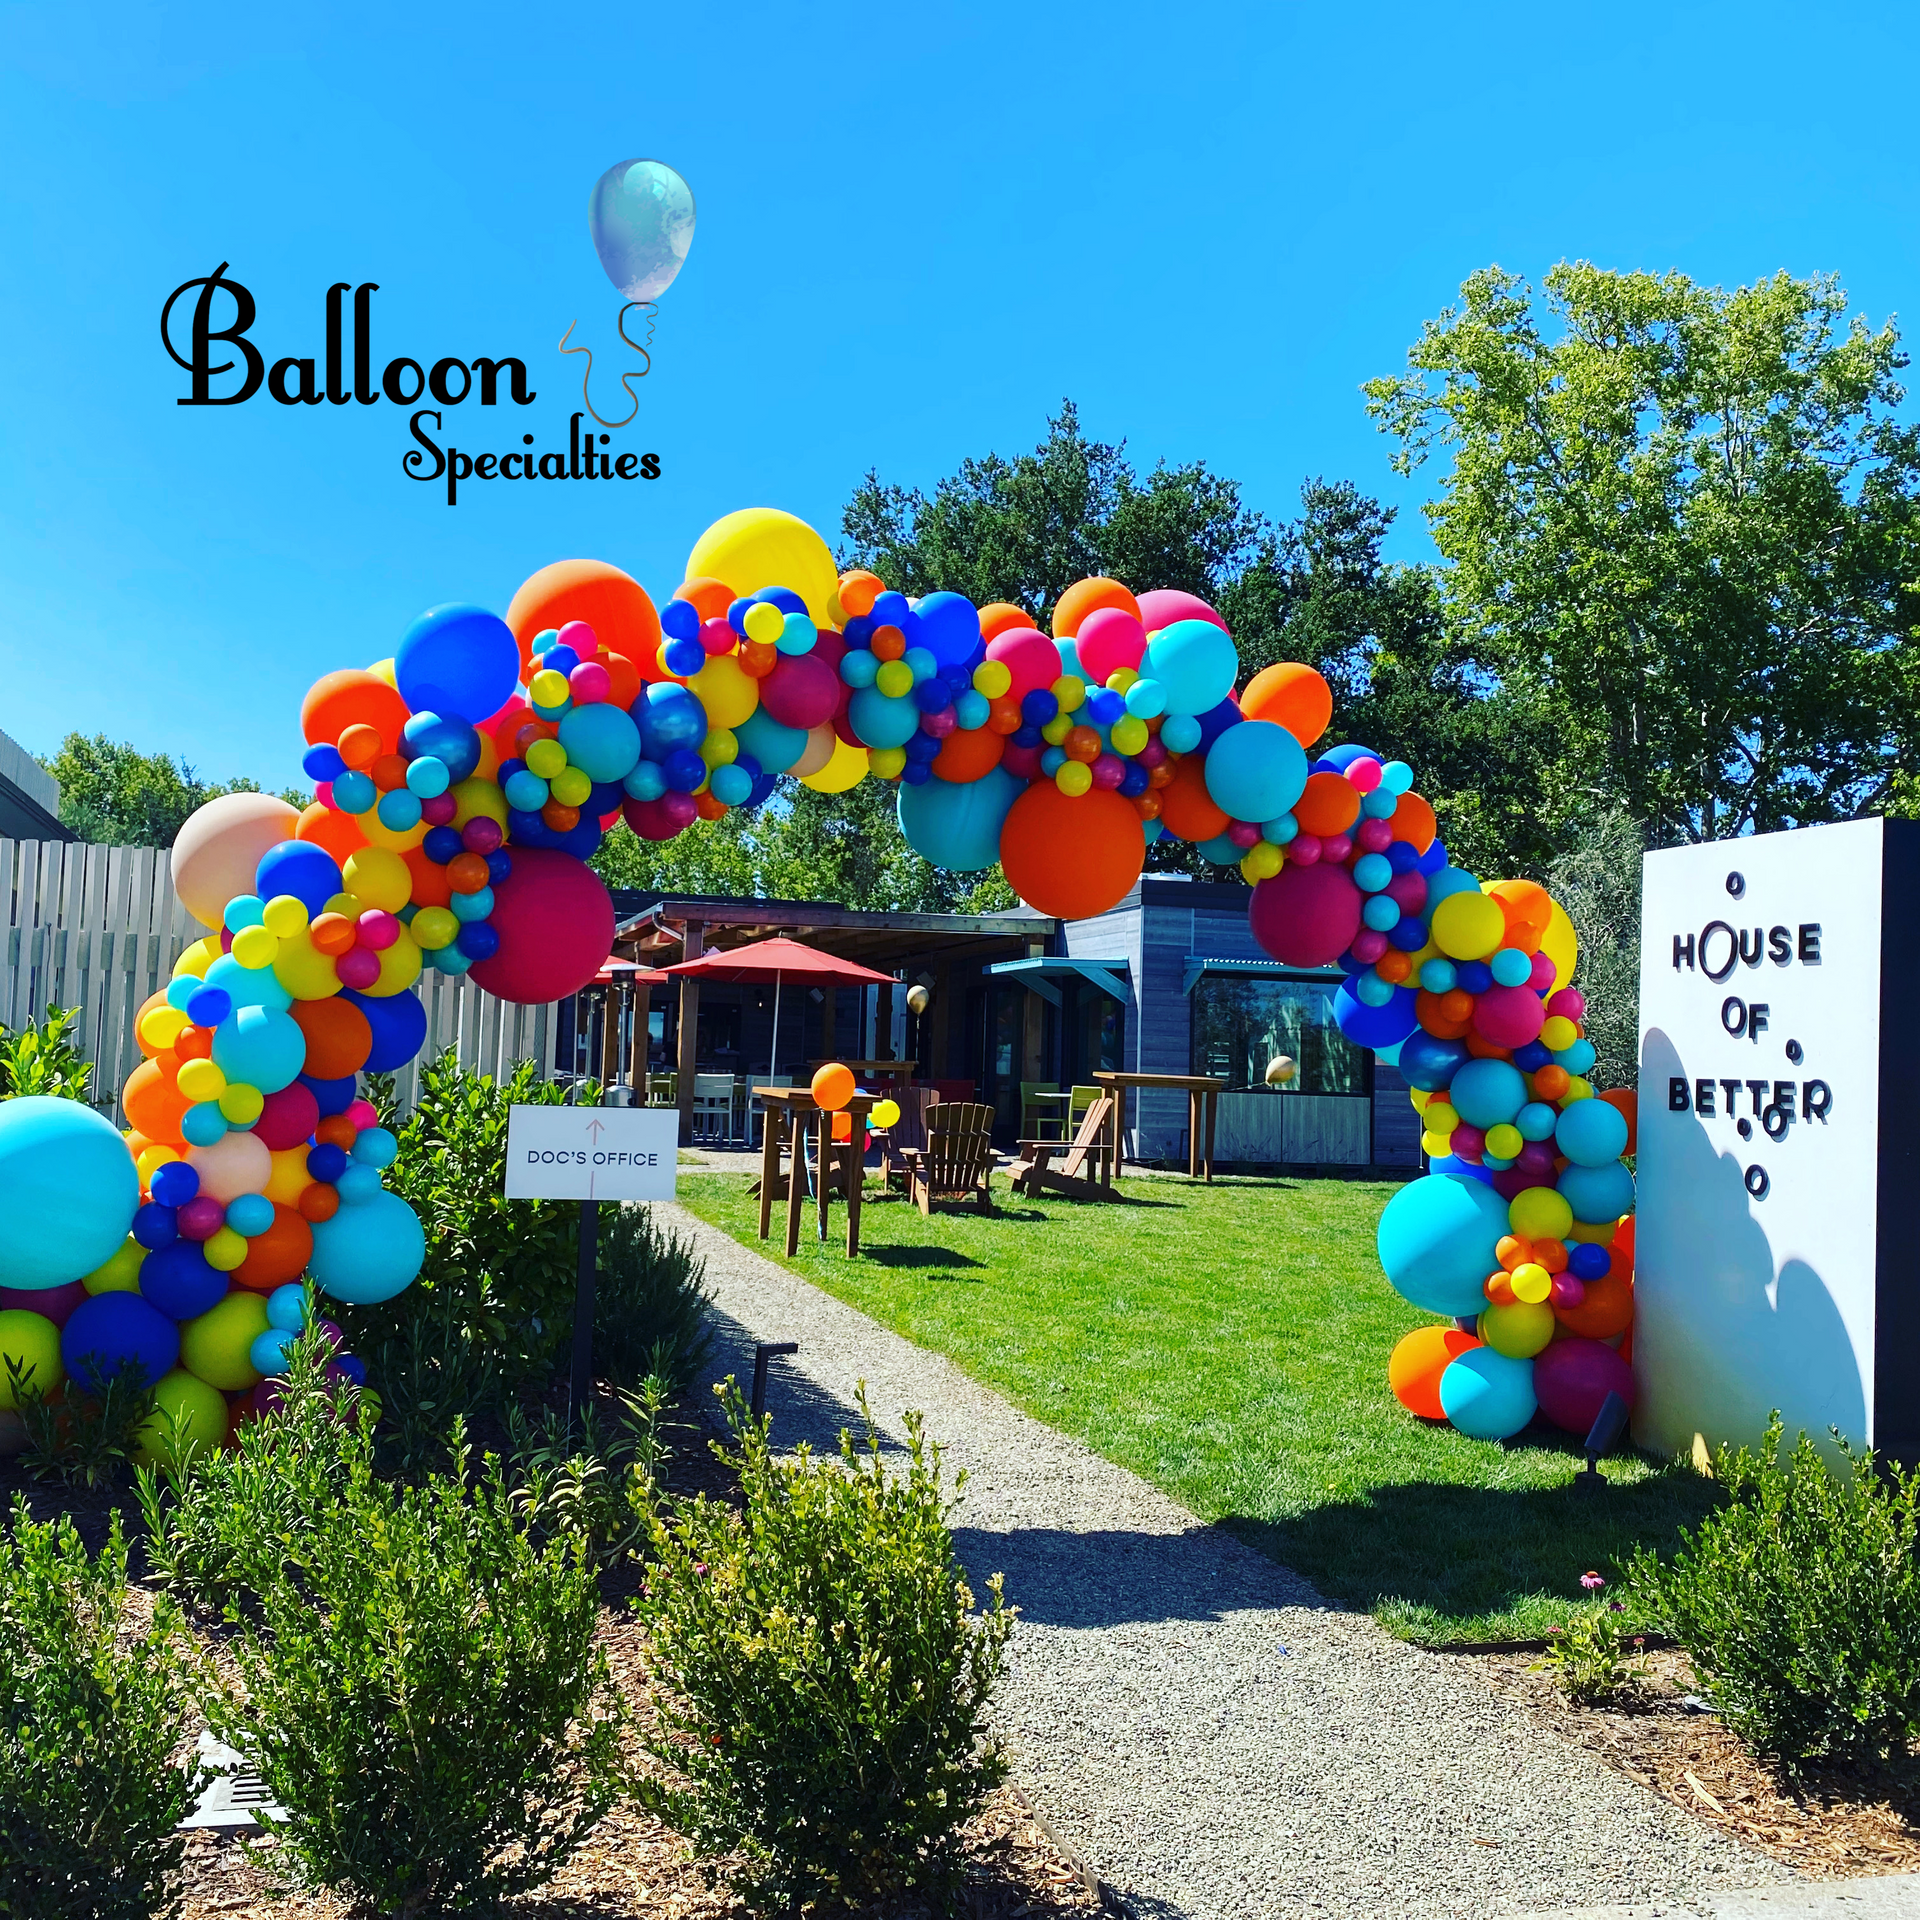 A sign that says house of better is surrounded by balloons